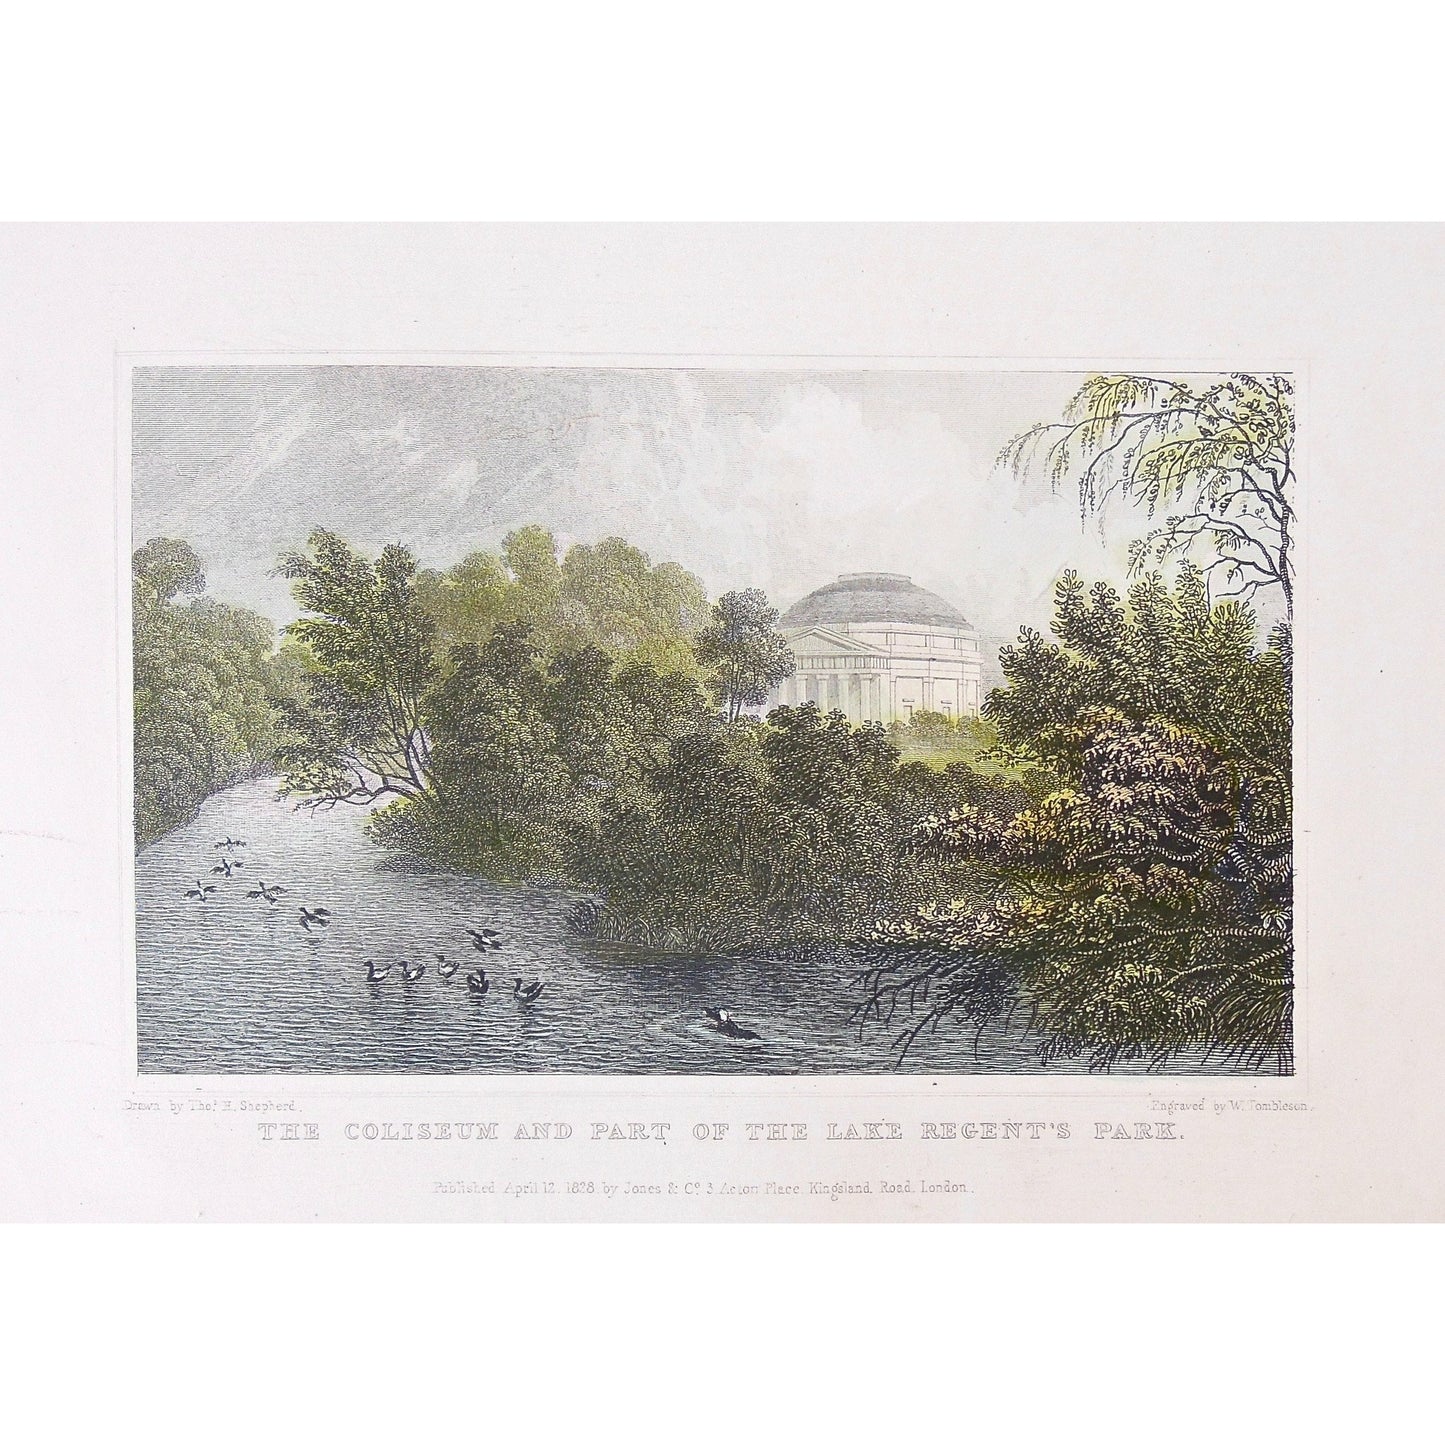 An Island of the Lake & Part of Cornwall & Clarence Terrace, Regent's Park. / The Coliseum and Part of the Lake Regent's Park.  (S2-32)